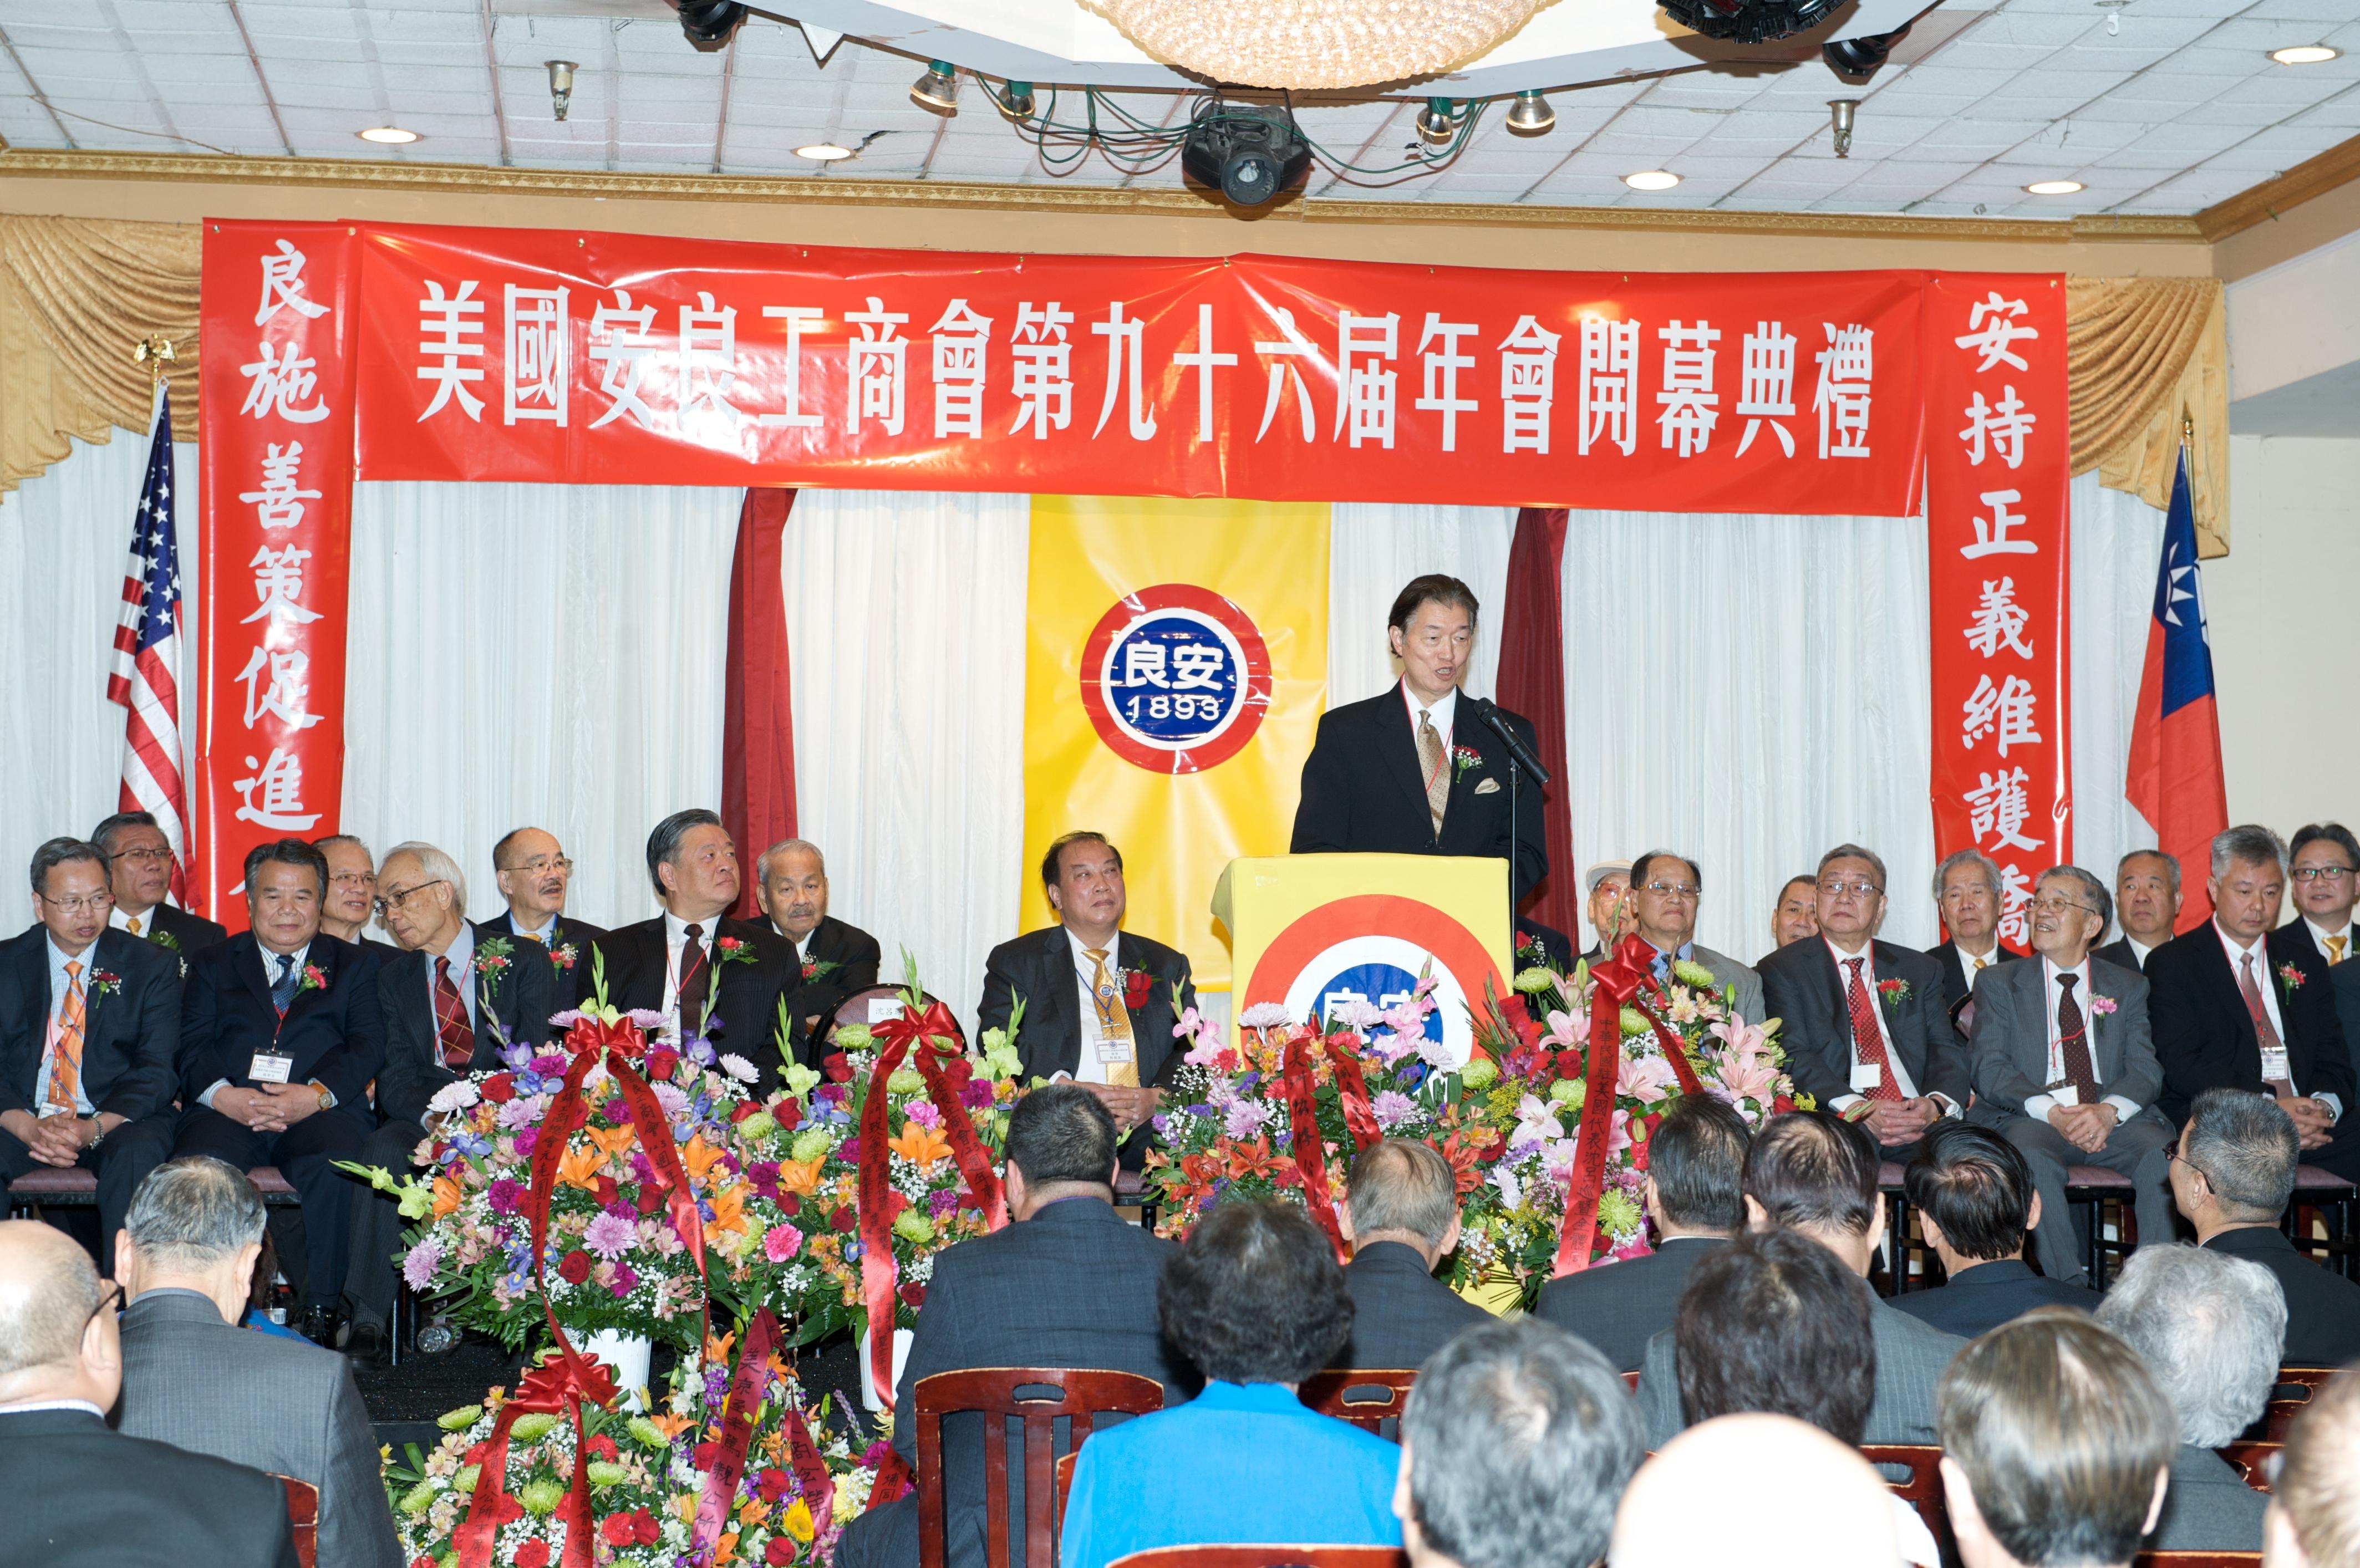 The Chinese Merchants Association in the United States celebrated its 123rd anniversary and held the 96th Annual Conference in Maryland on April 18th-20th, 2016. Representative Lyushun Shen and Vice Minister Roy Yuan-Rong Leu of the Overseas Community Affairs Council (OCAC), Republic of China (Taiwan), were invited to attend and address the opening ceremony that day. In his speech, Representative Shen not only praised the Association for its spirit of loyalty and fraternity, but also offered his appreciation to the Association for its donations during many Taiwan disaster relief efforts.